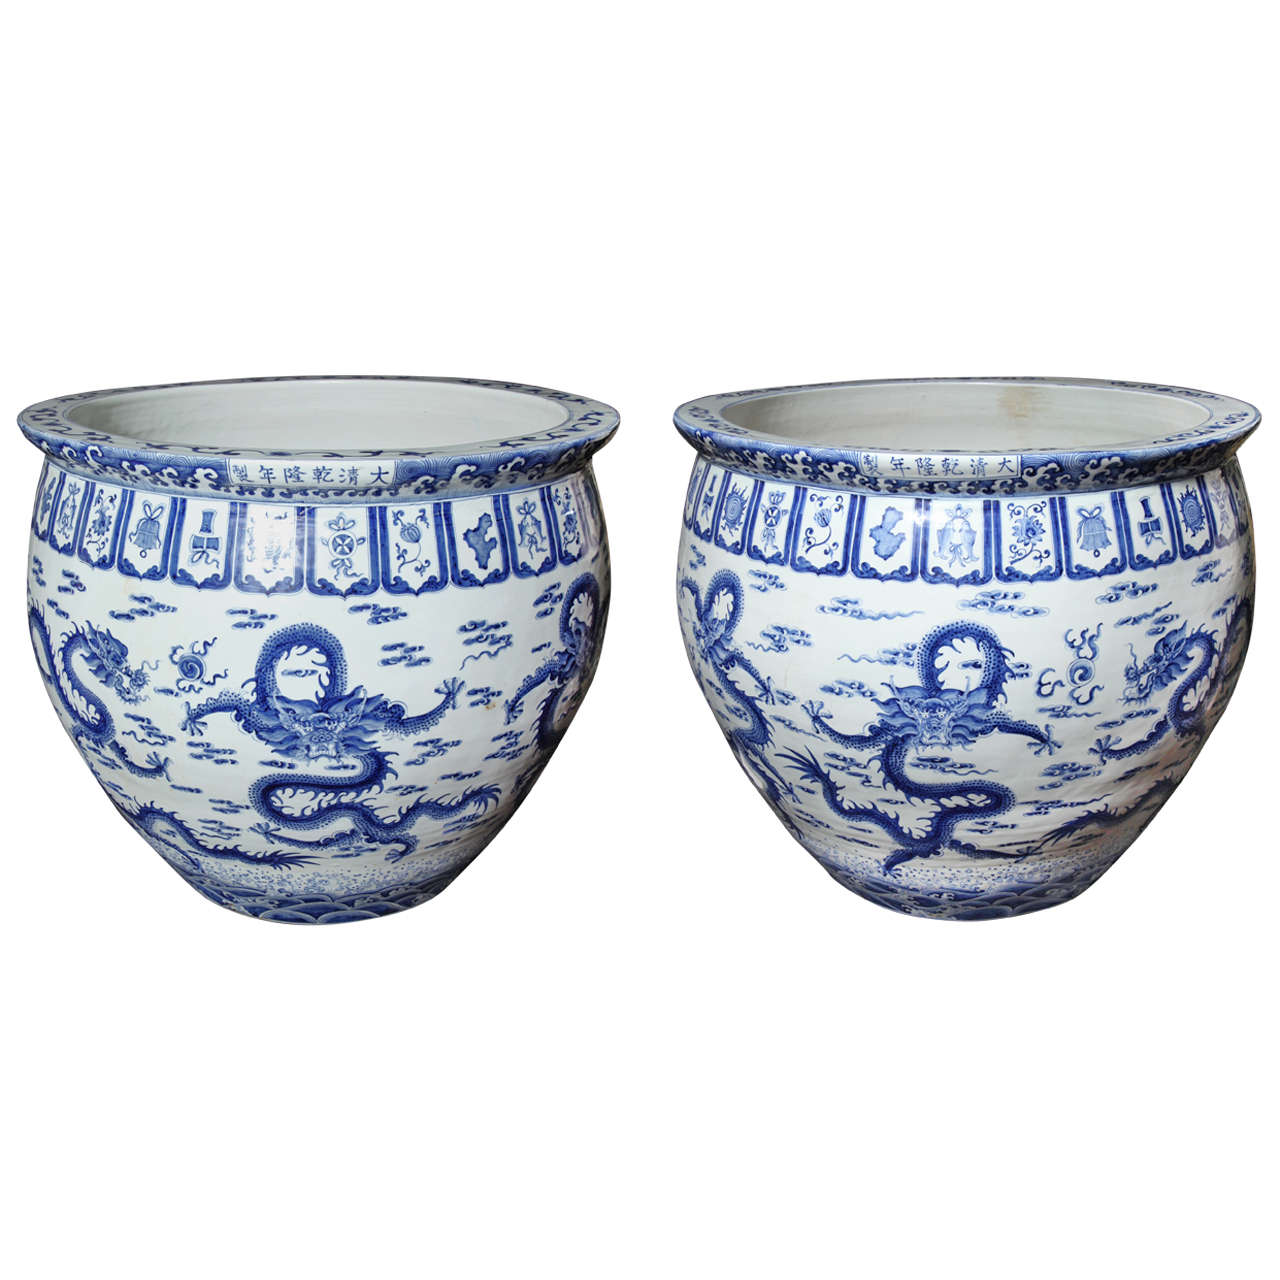 Pair of Blue and White Chinese Fishbowls/Jardinaires